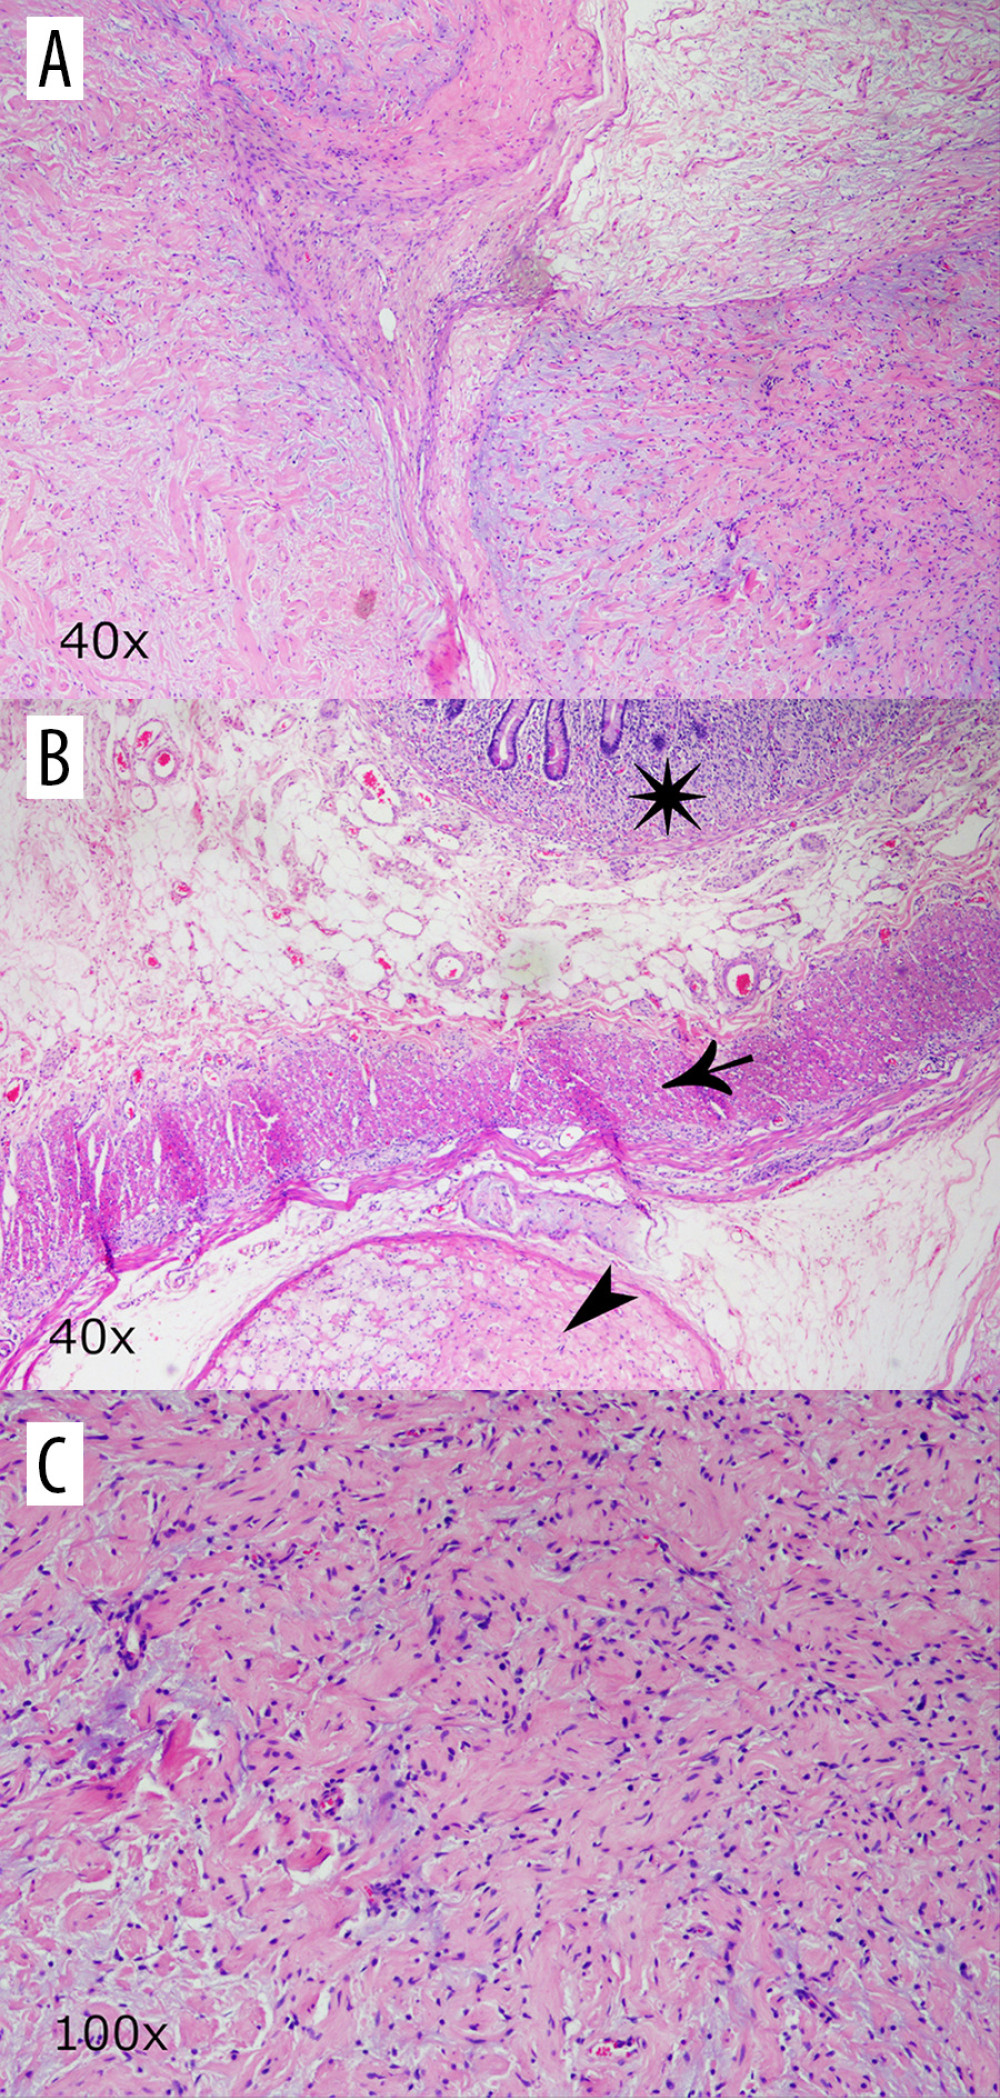 (A) Plexiform neurofibroma showing thickened tortuous nerve branches with increased amount of myxoid matrix growing in between fibroadipose tissue. 40× magnification. (B) Plexiform neurofibroma (arrowhead) pushing against the muscularis externa of the intestine (arrow). Normal intestinal mucosa seen at top (star). 40× magnification. (C) At higher magnification, the tumor presents as intersecting bundles of Schwann cells with pink cytoplasm and wavy, hyperchromatic nuclei present in a background of myxoid stroma. 100× magnification.